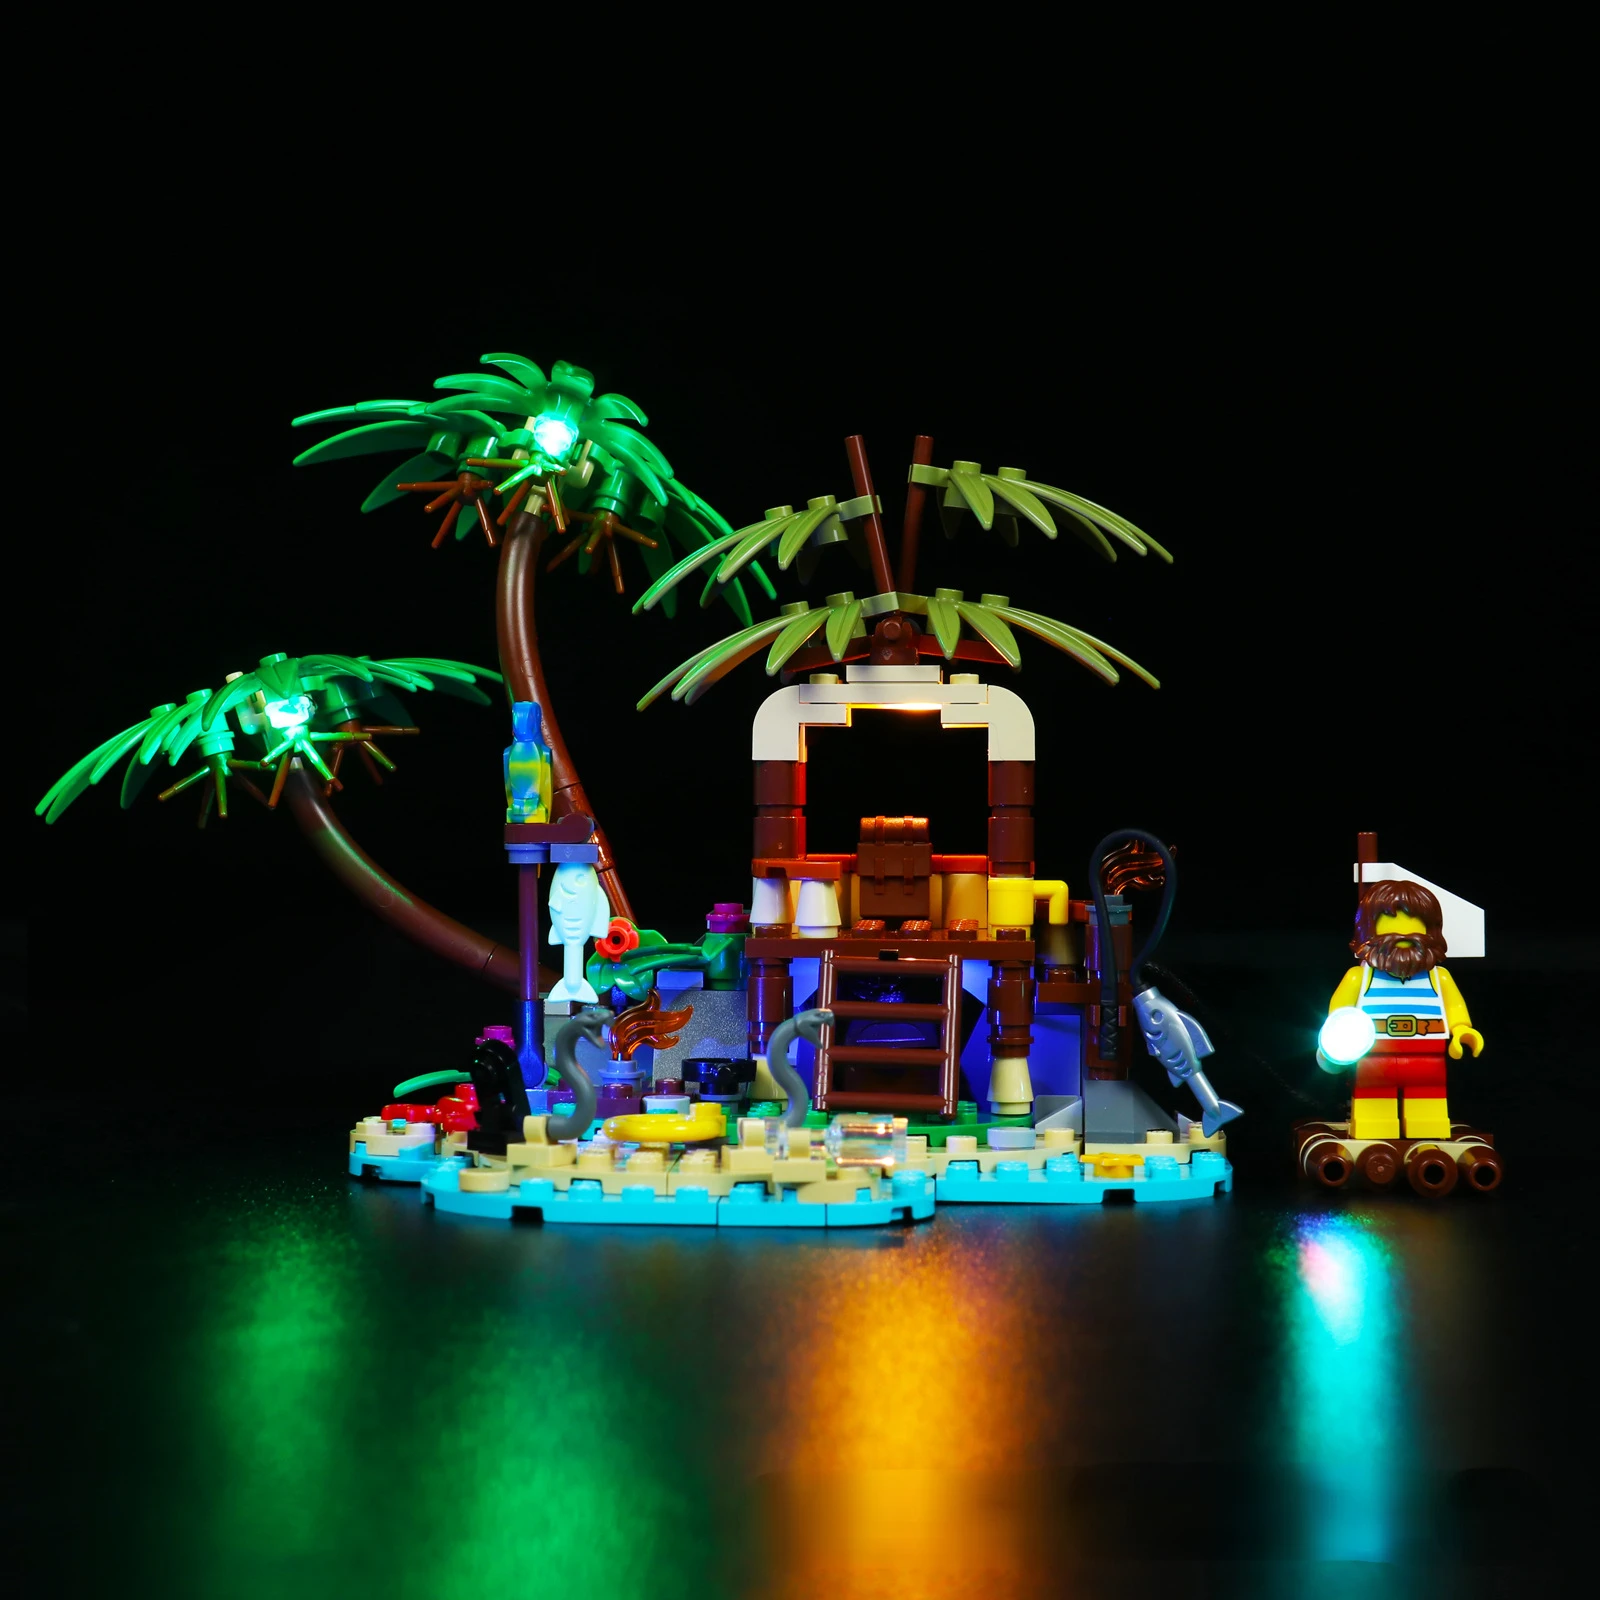 

Led Light Kit for The Rest of Ray's Life on A Deserted Island 40566 Building Blocks Bricks Only LED Inlcuded